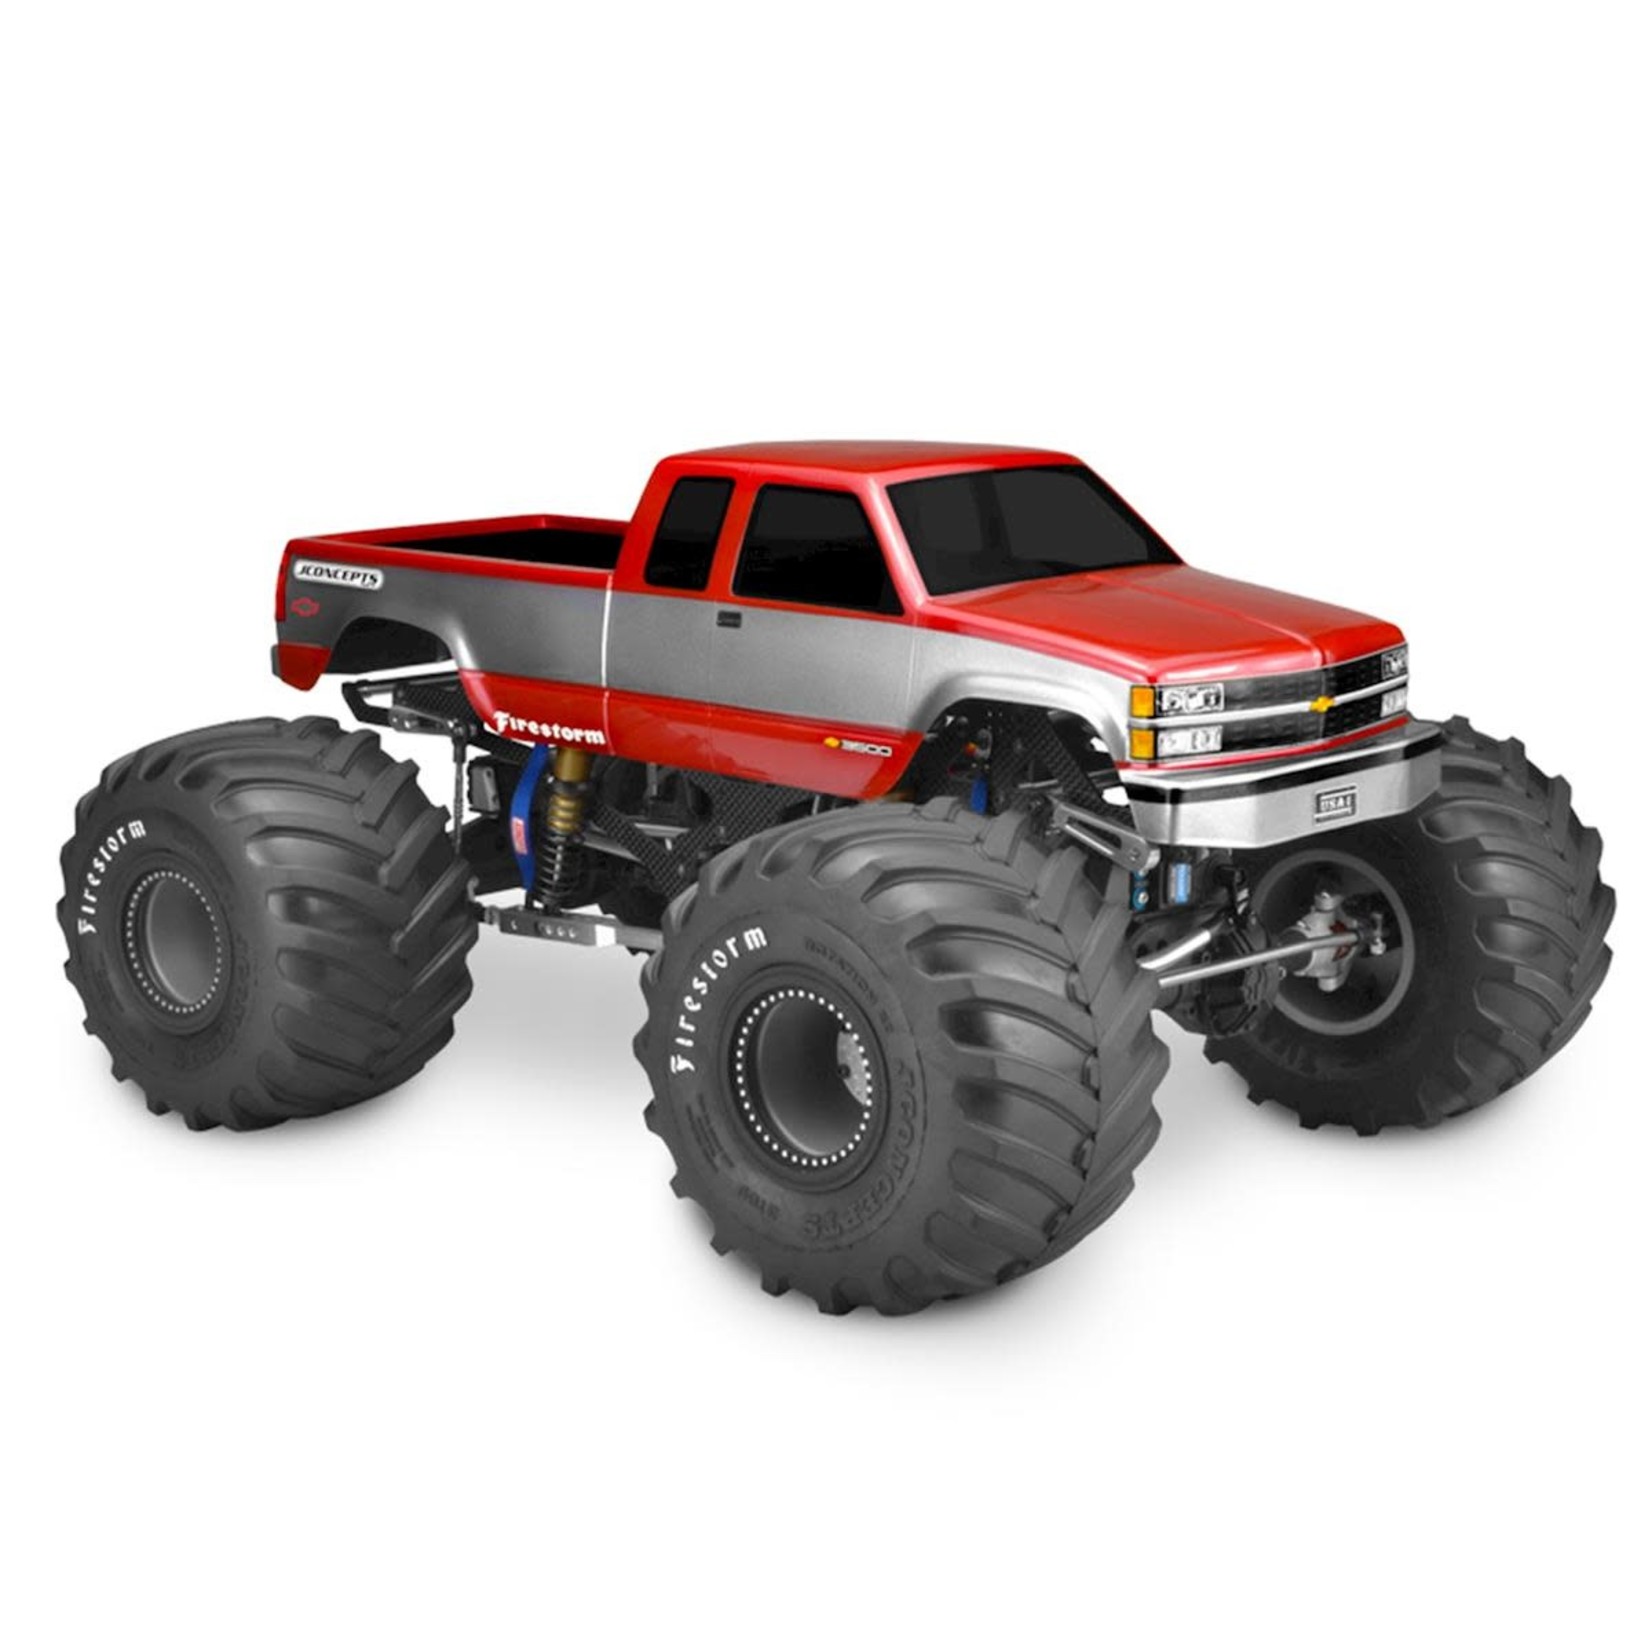 JConcepts JConcepts 1988 Chevy Silverado Extended Cab Monster Truck Body (Clear) #0339